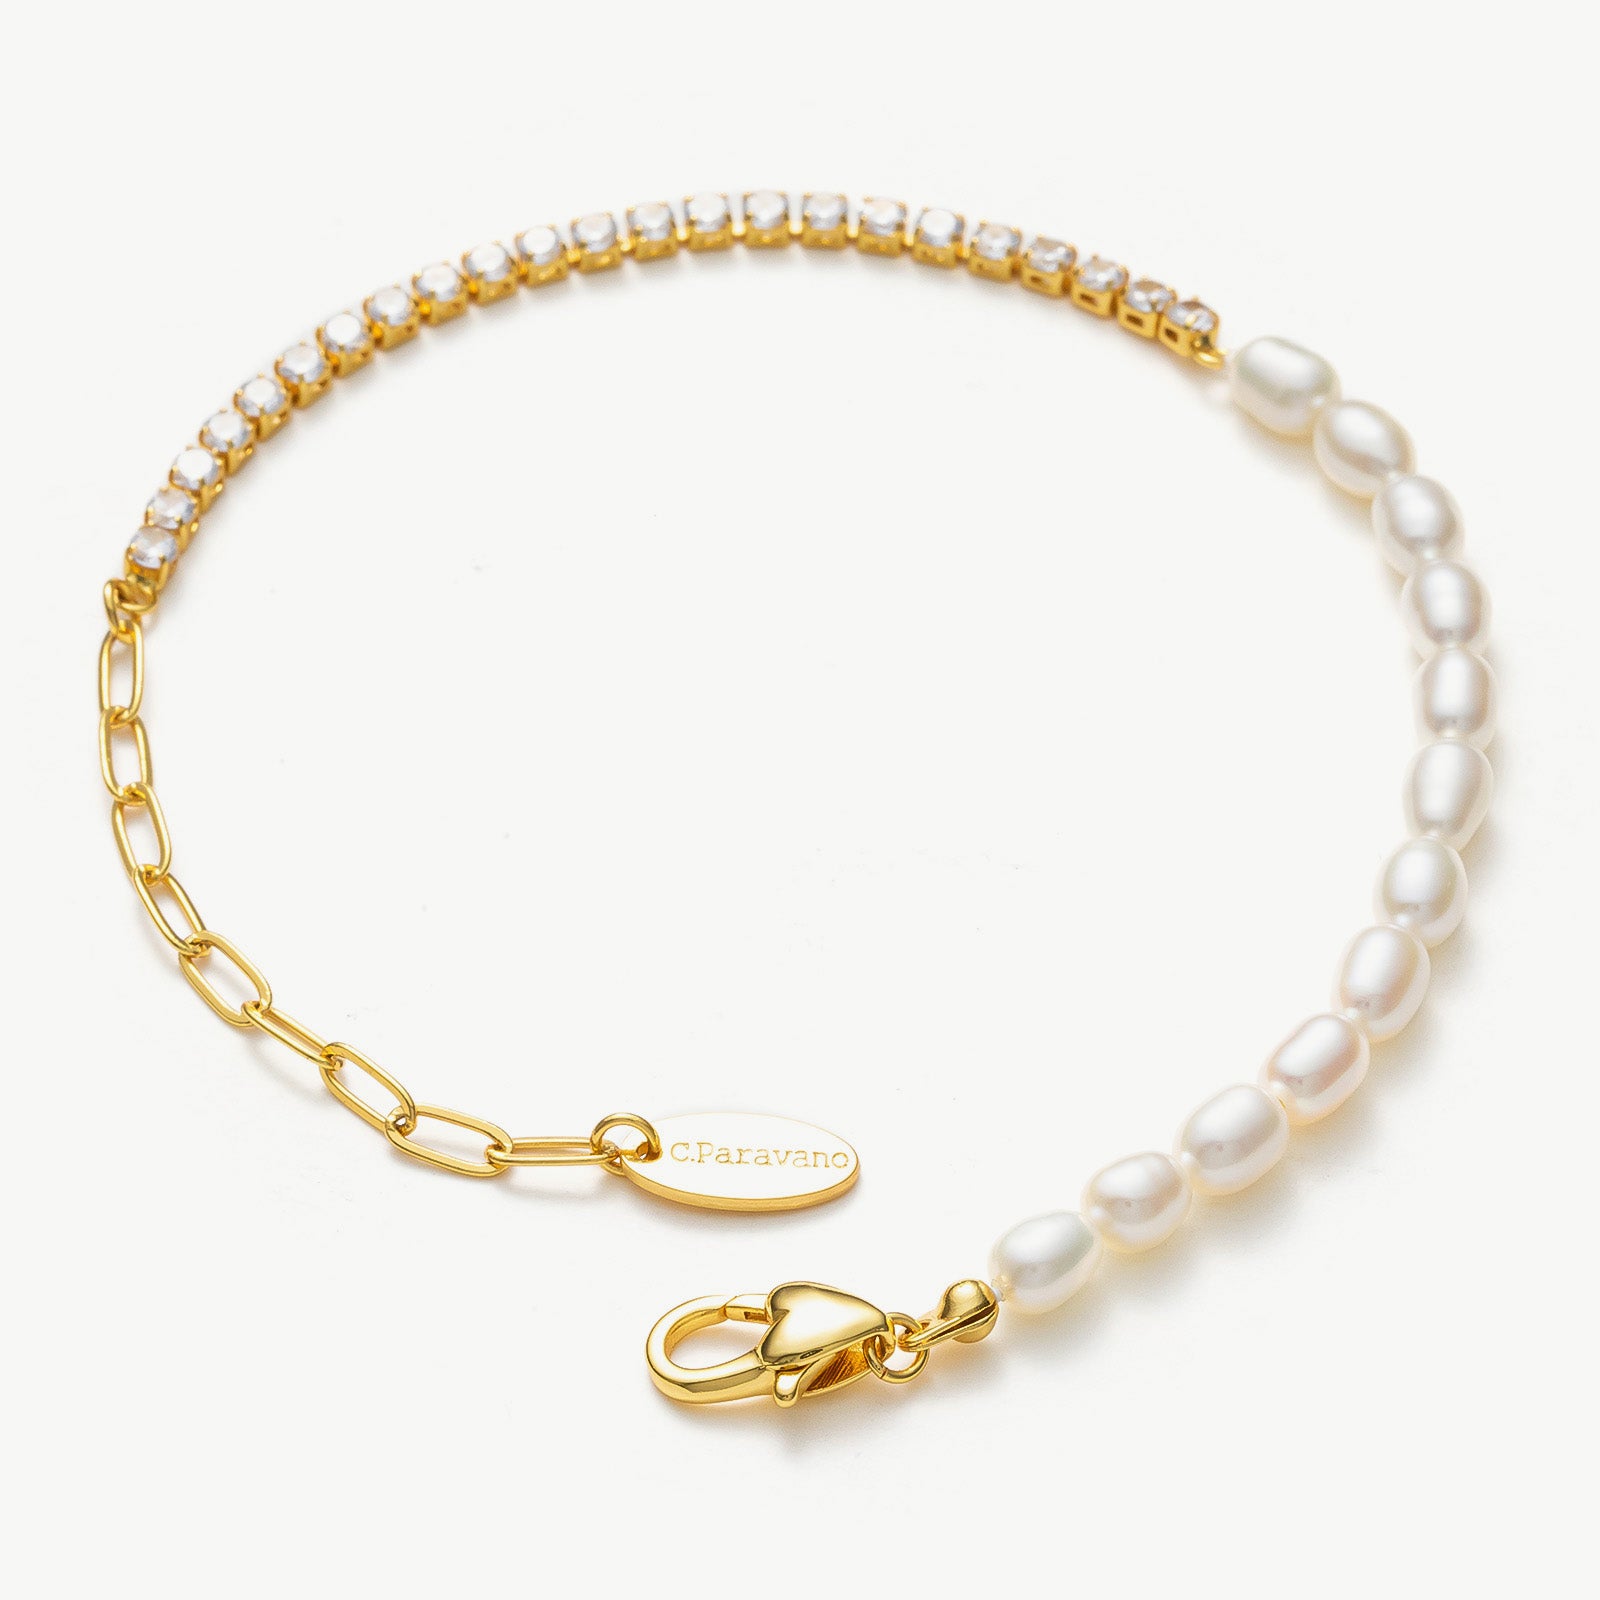 Pearl Crystal Chain Bracelet, a fusion of modern design and classic pearls and crystals in gold, this bracelet brings a contemporary twist to traditional elegance, making it a versatile and chic accessory